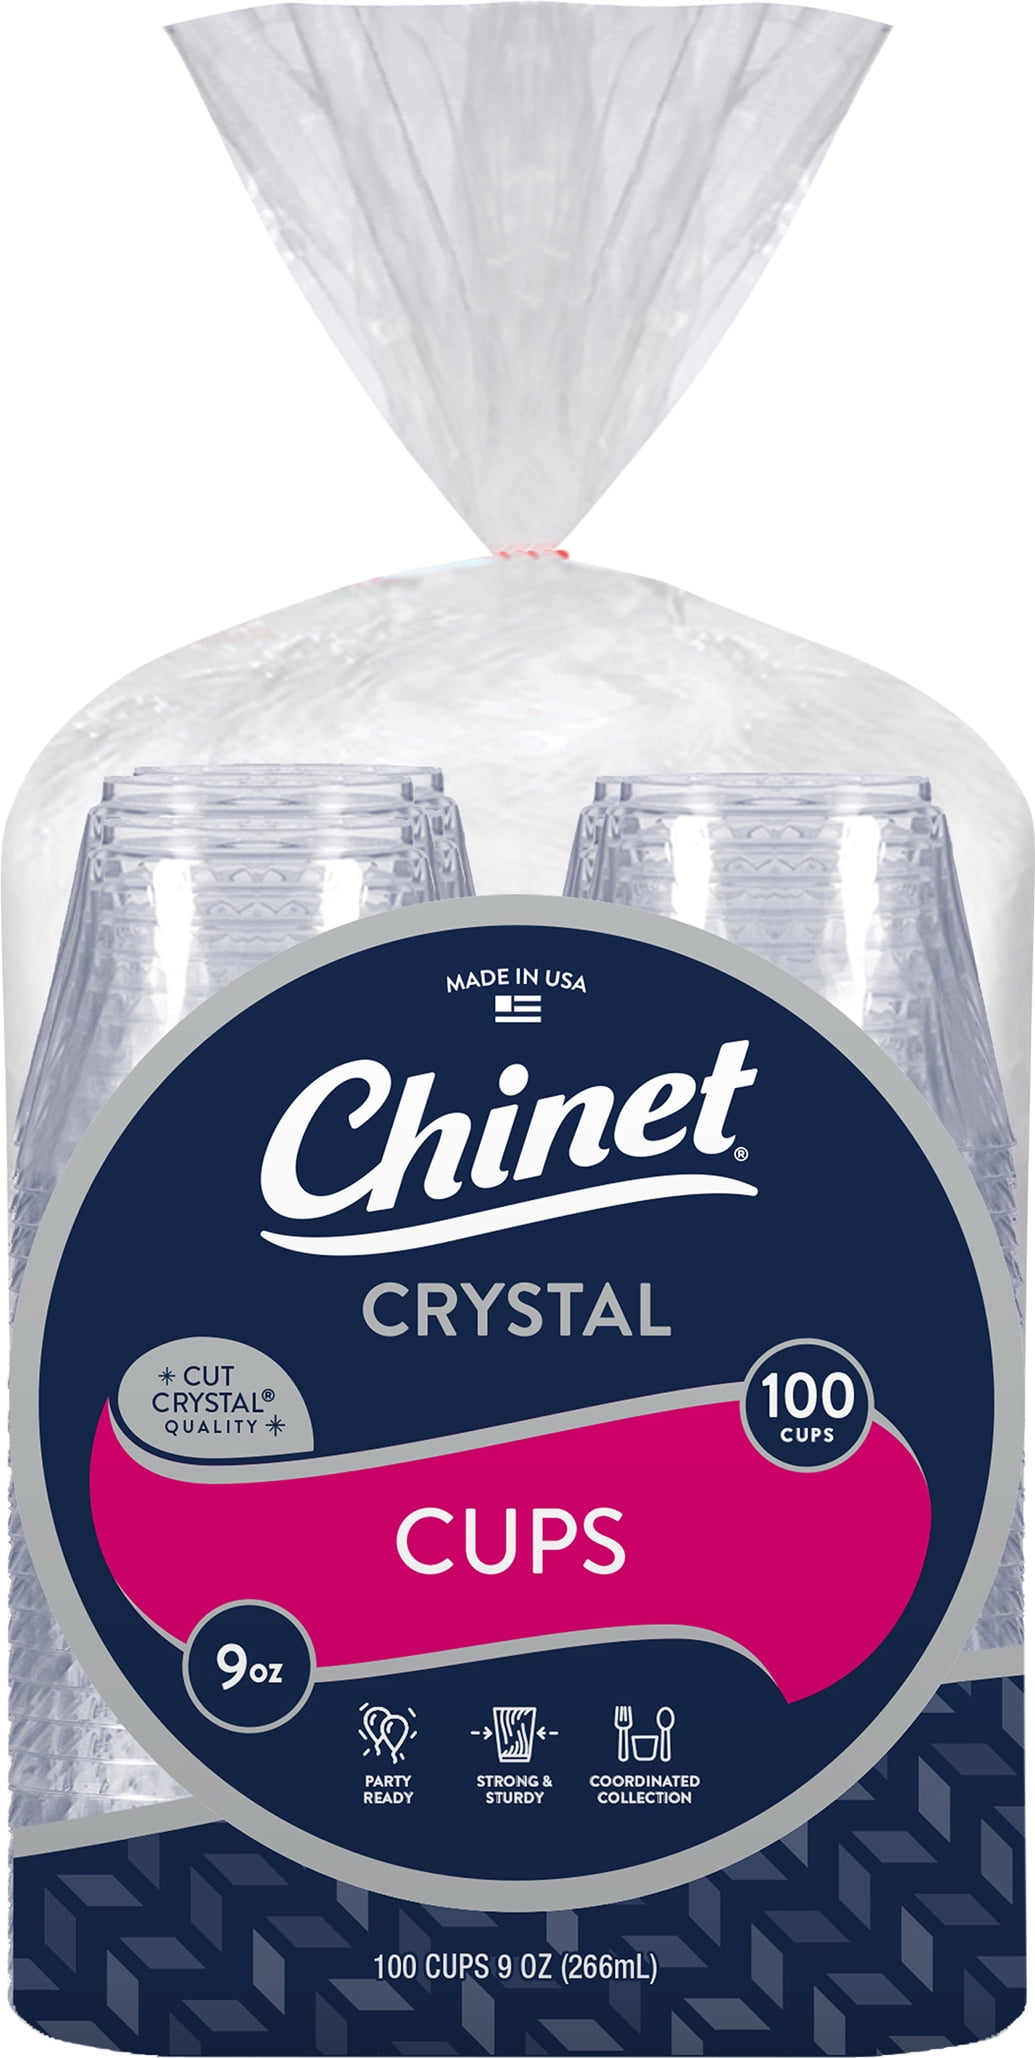 Chinet Cups, Crystal, 9 Ounce - 100 cups